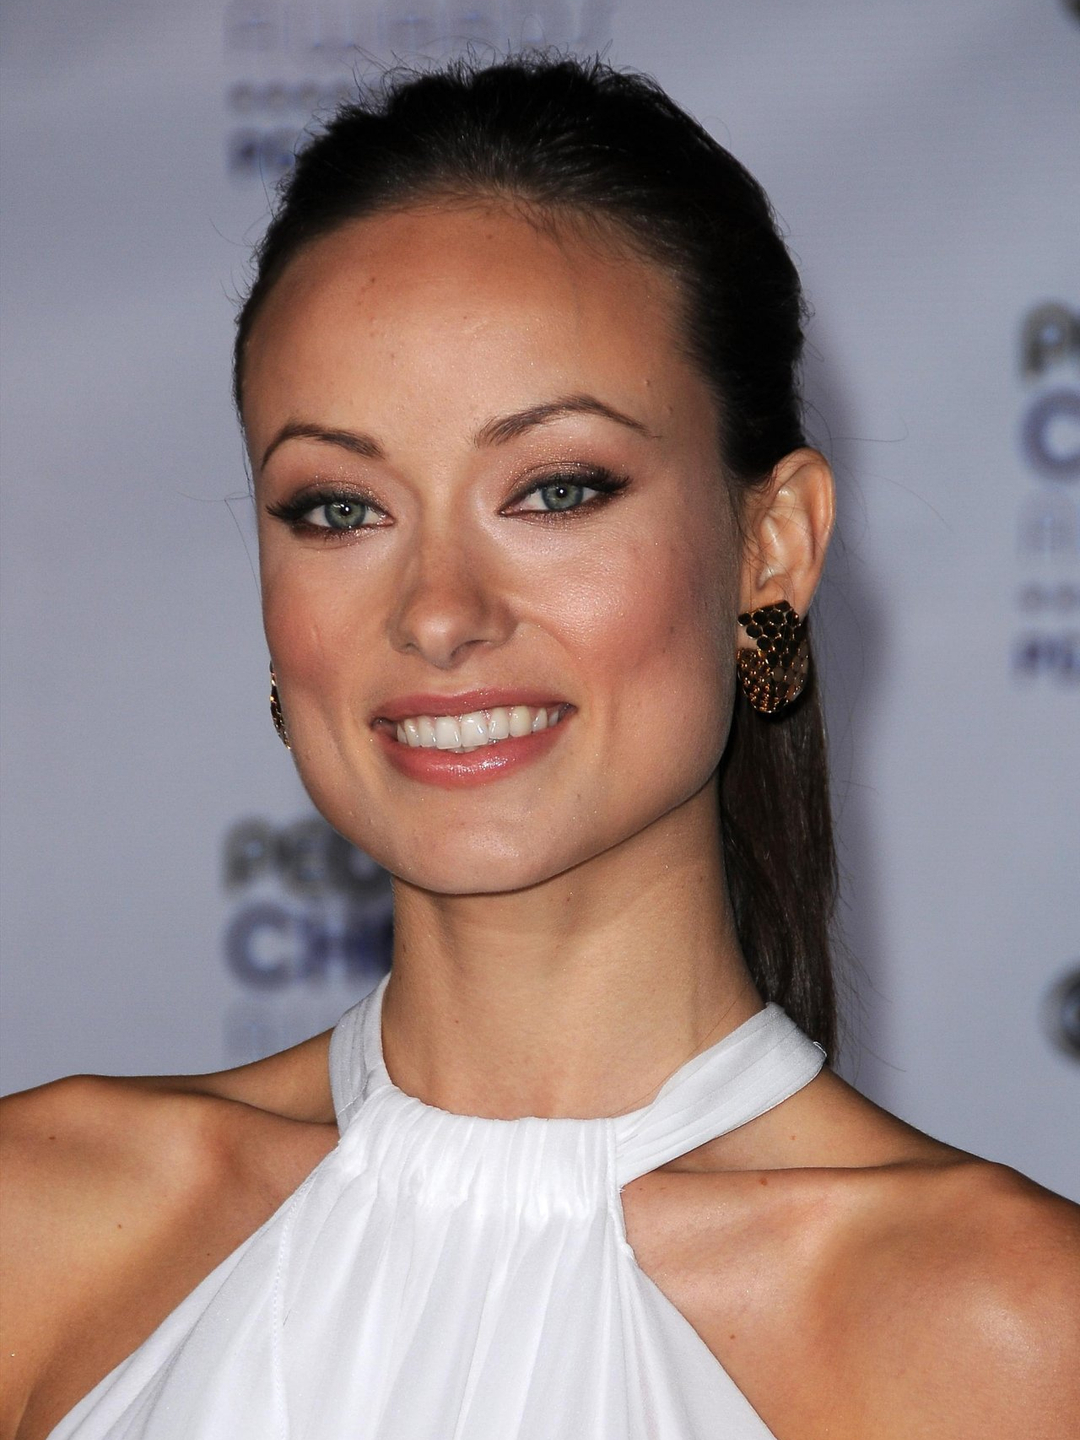 Olivia Wilde does she have kids